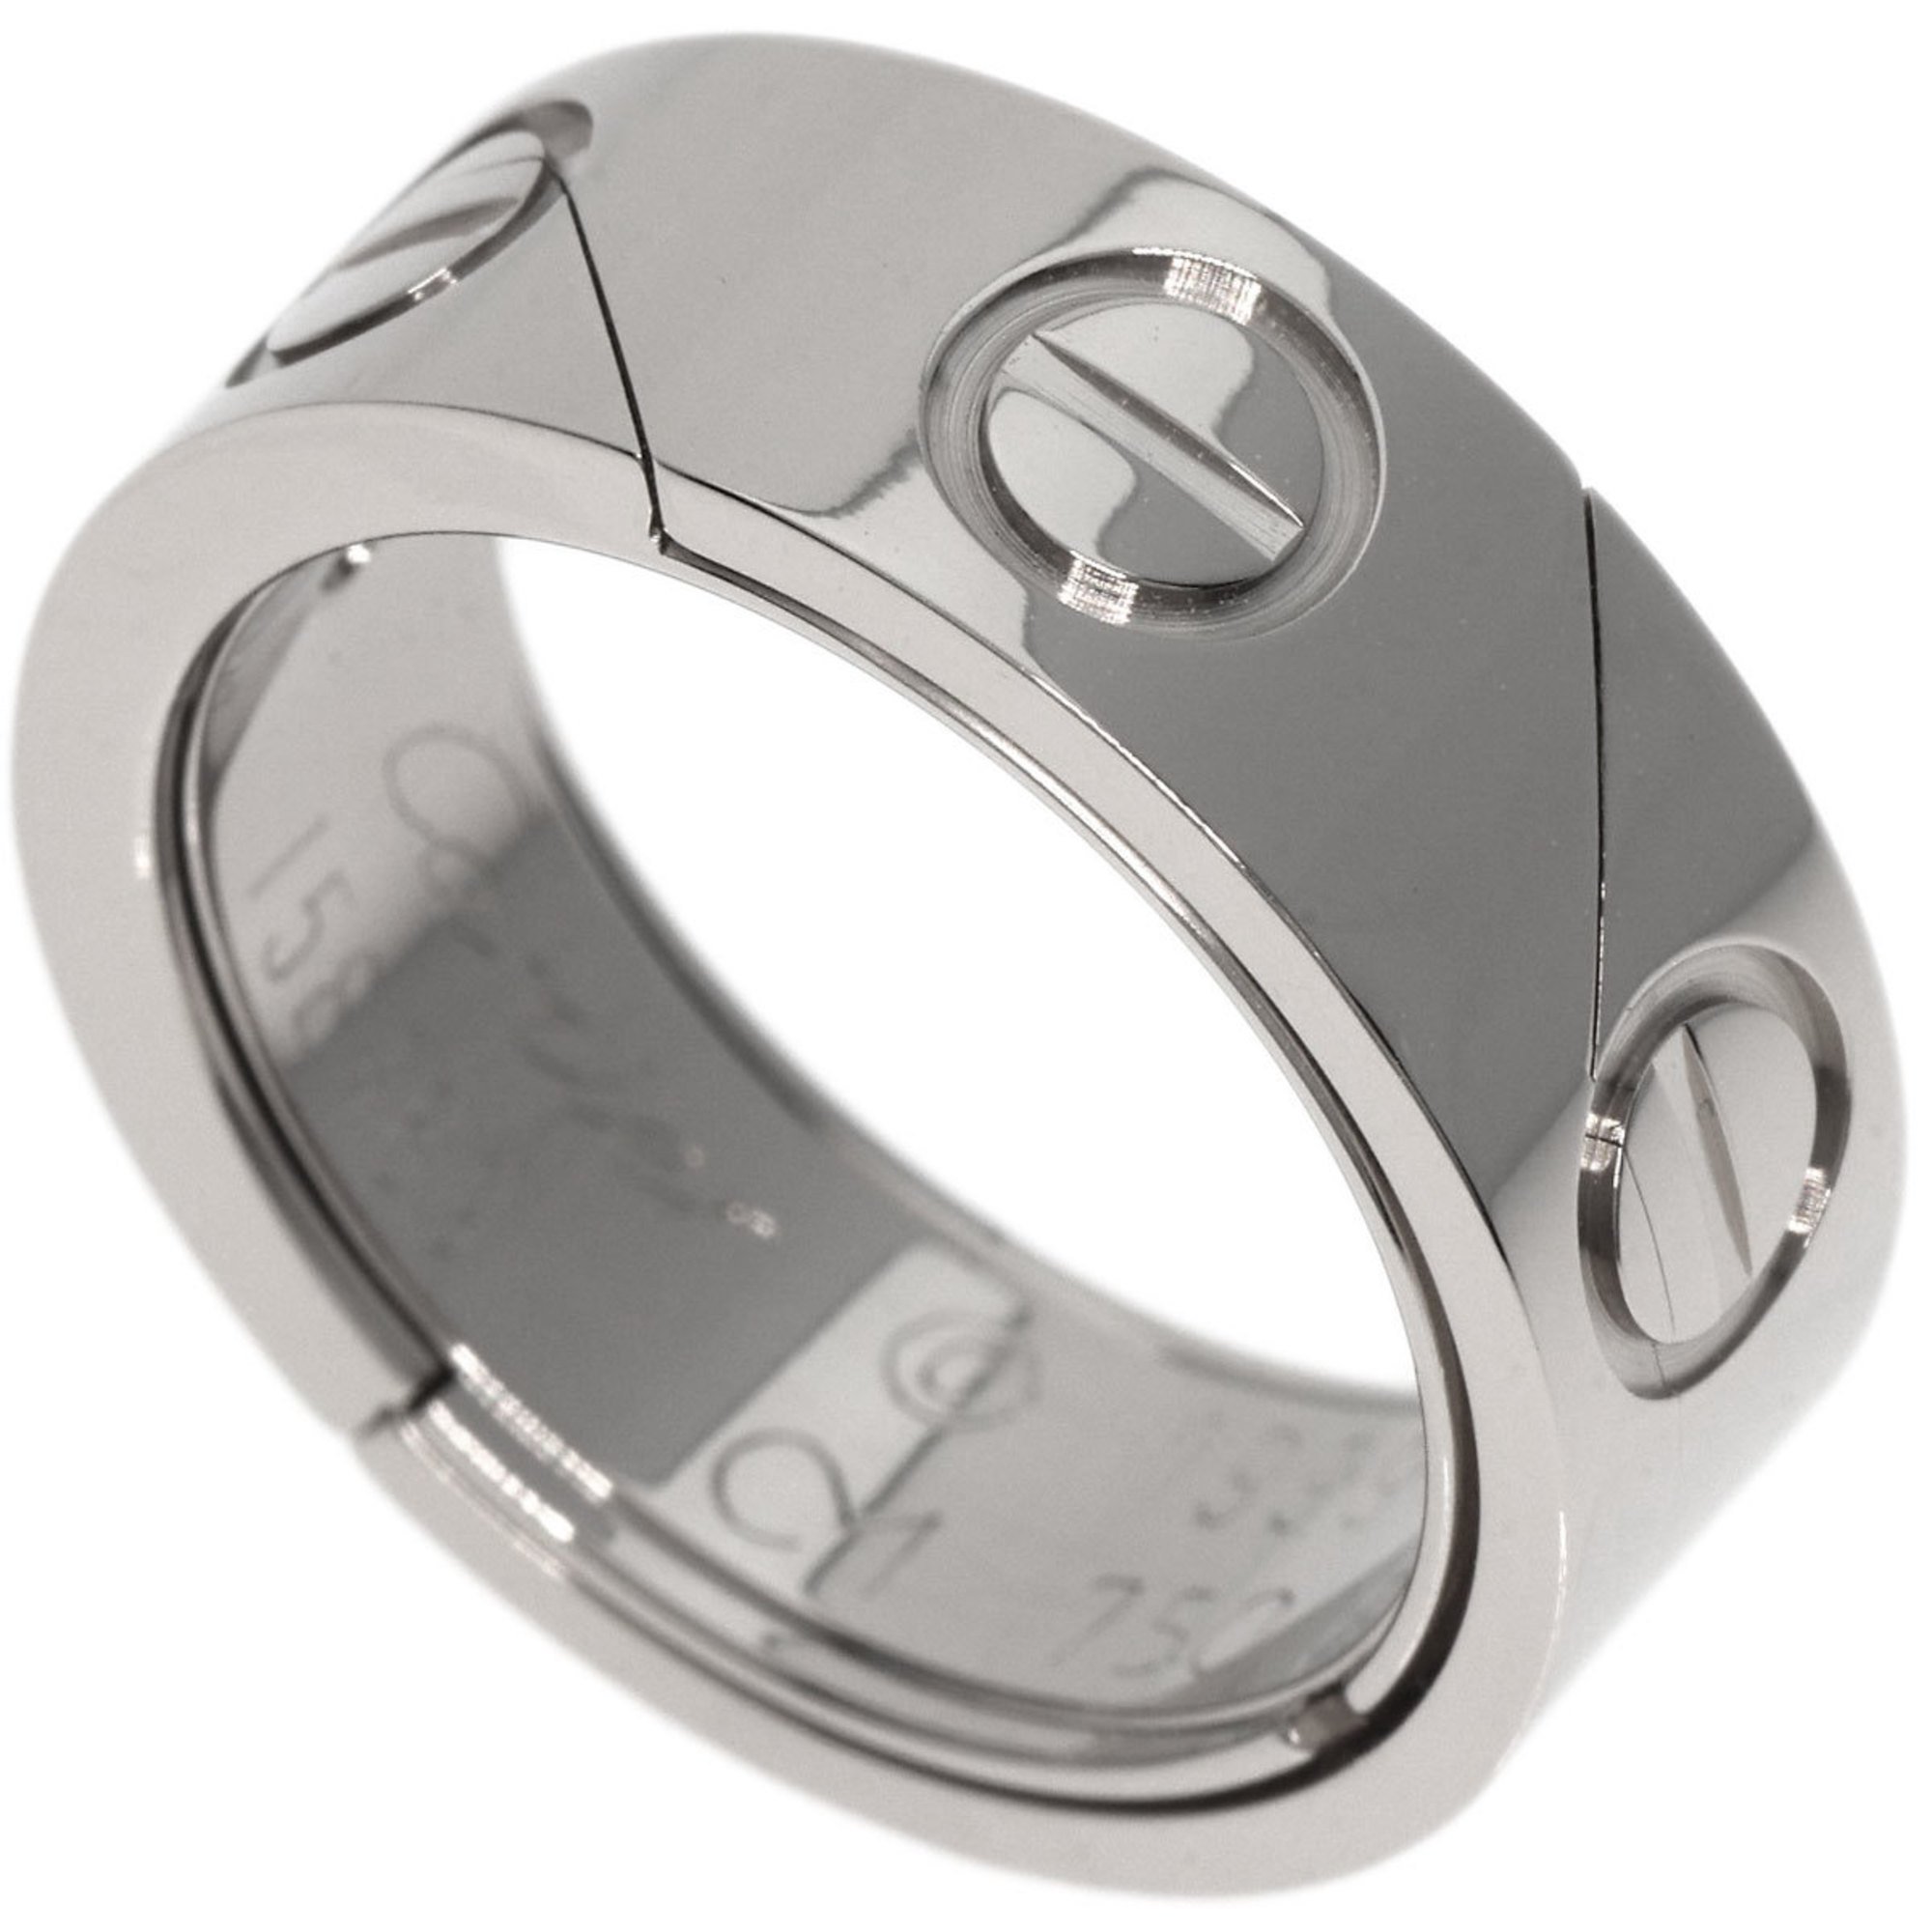 Cartier Astro Love Ring 1999 Limited Edition #51 K18 White Gold Women's CARTIER